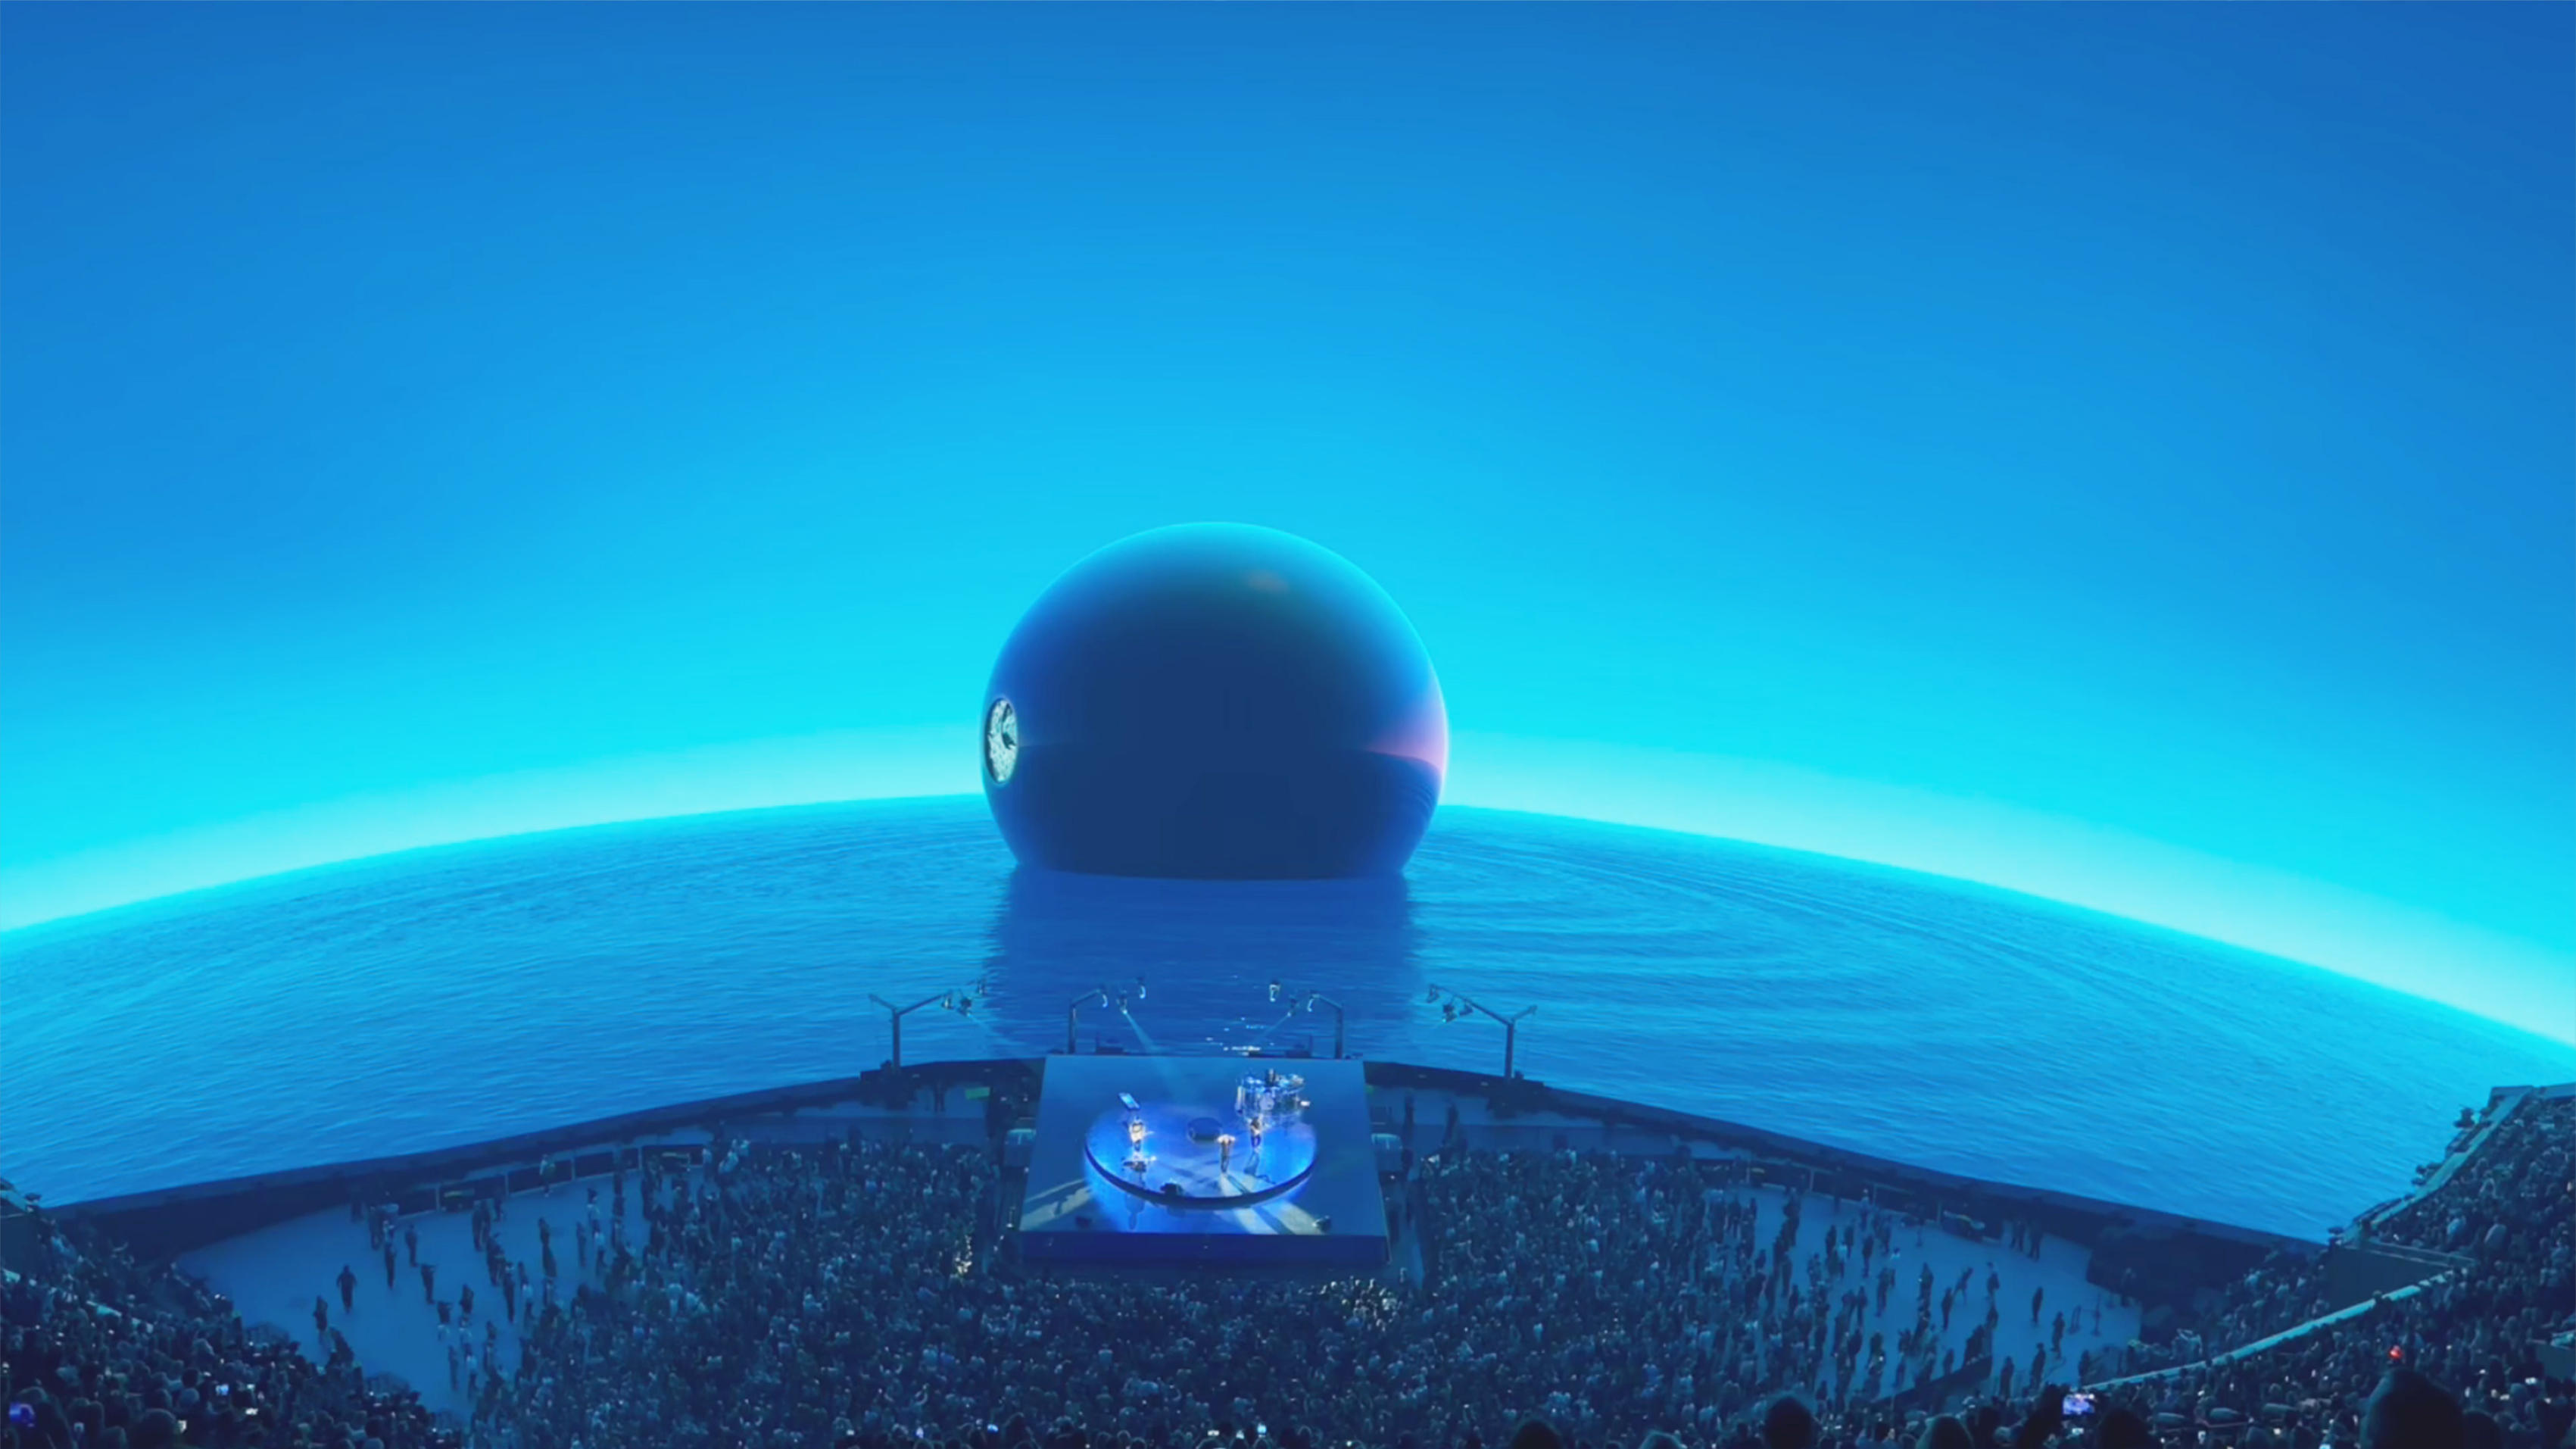 A blue orb sits in water on the massive LED screen inside the Sphere.